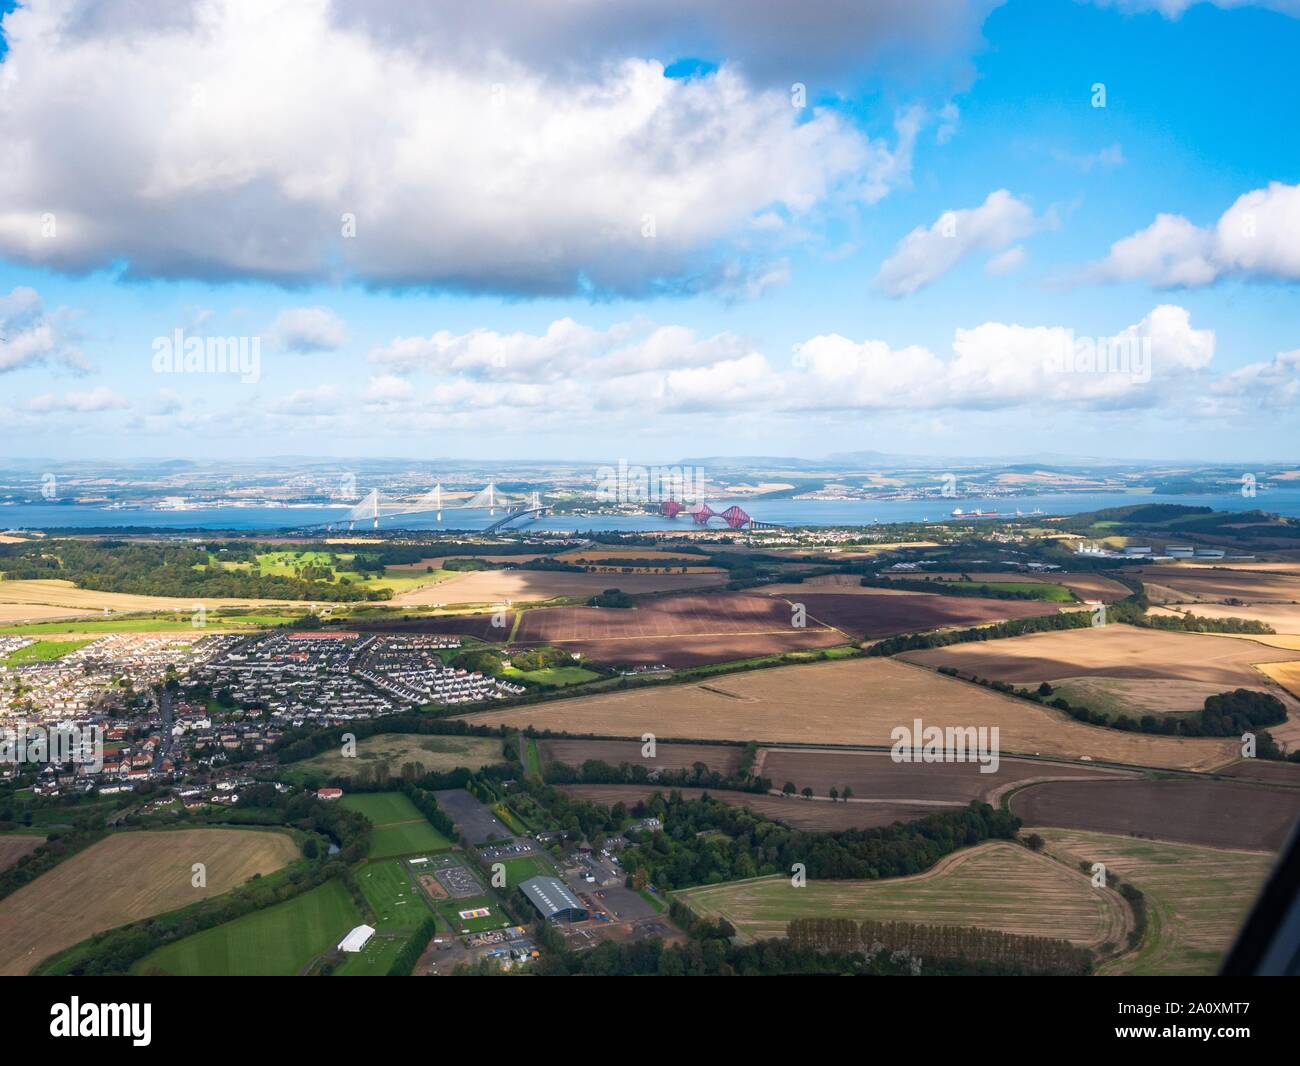 View from plane window of three bridges across Firth of Forth, Scotland, UK with Queensferry Crossing, Forth Rail Bridge & Forth Road Bridge Stock Photo